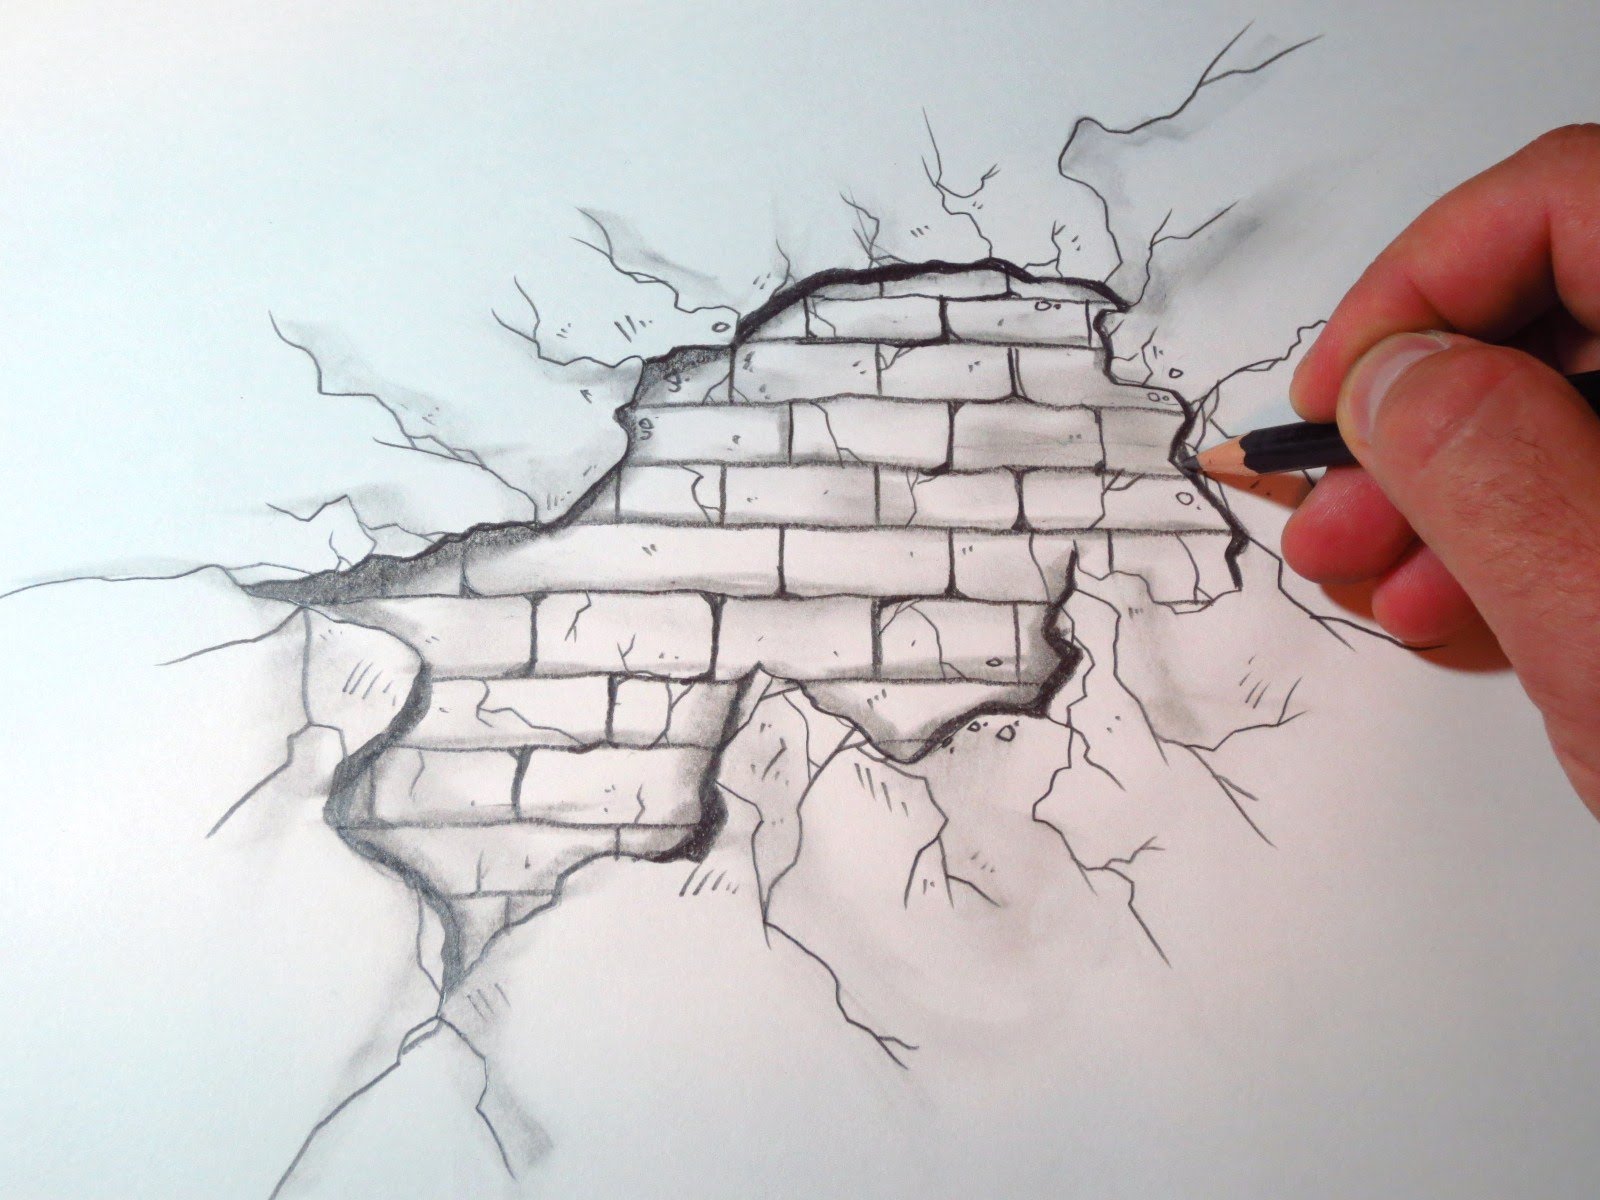 How To Draw A Cracked Brick Wall (The Original Video) - YouTube